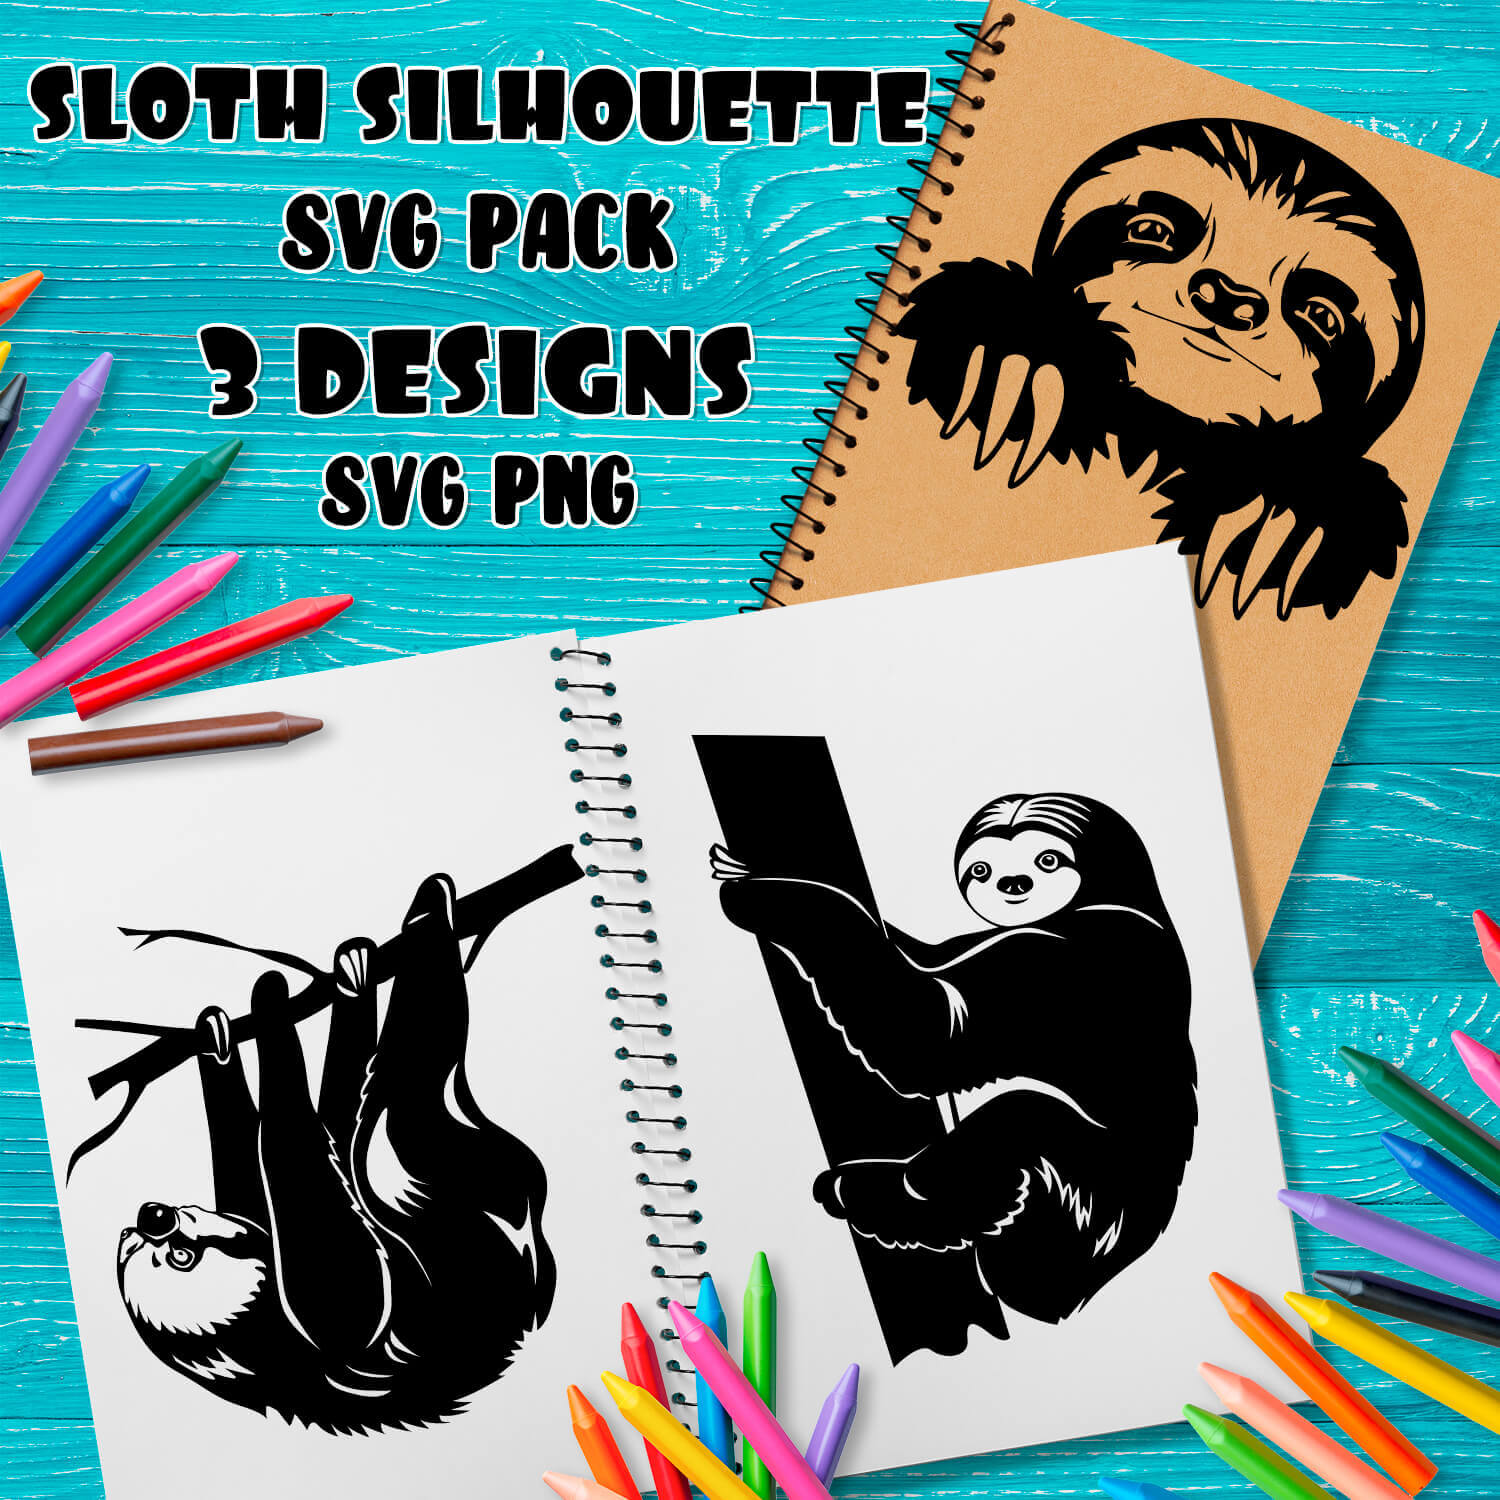 Notebook with a drawing of a sloth on it.